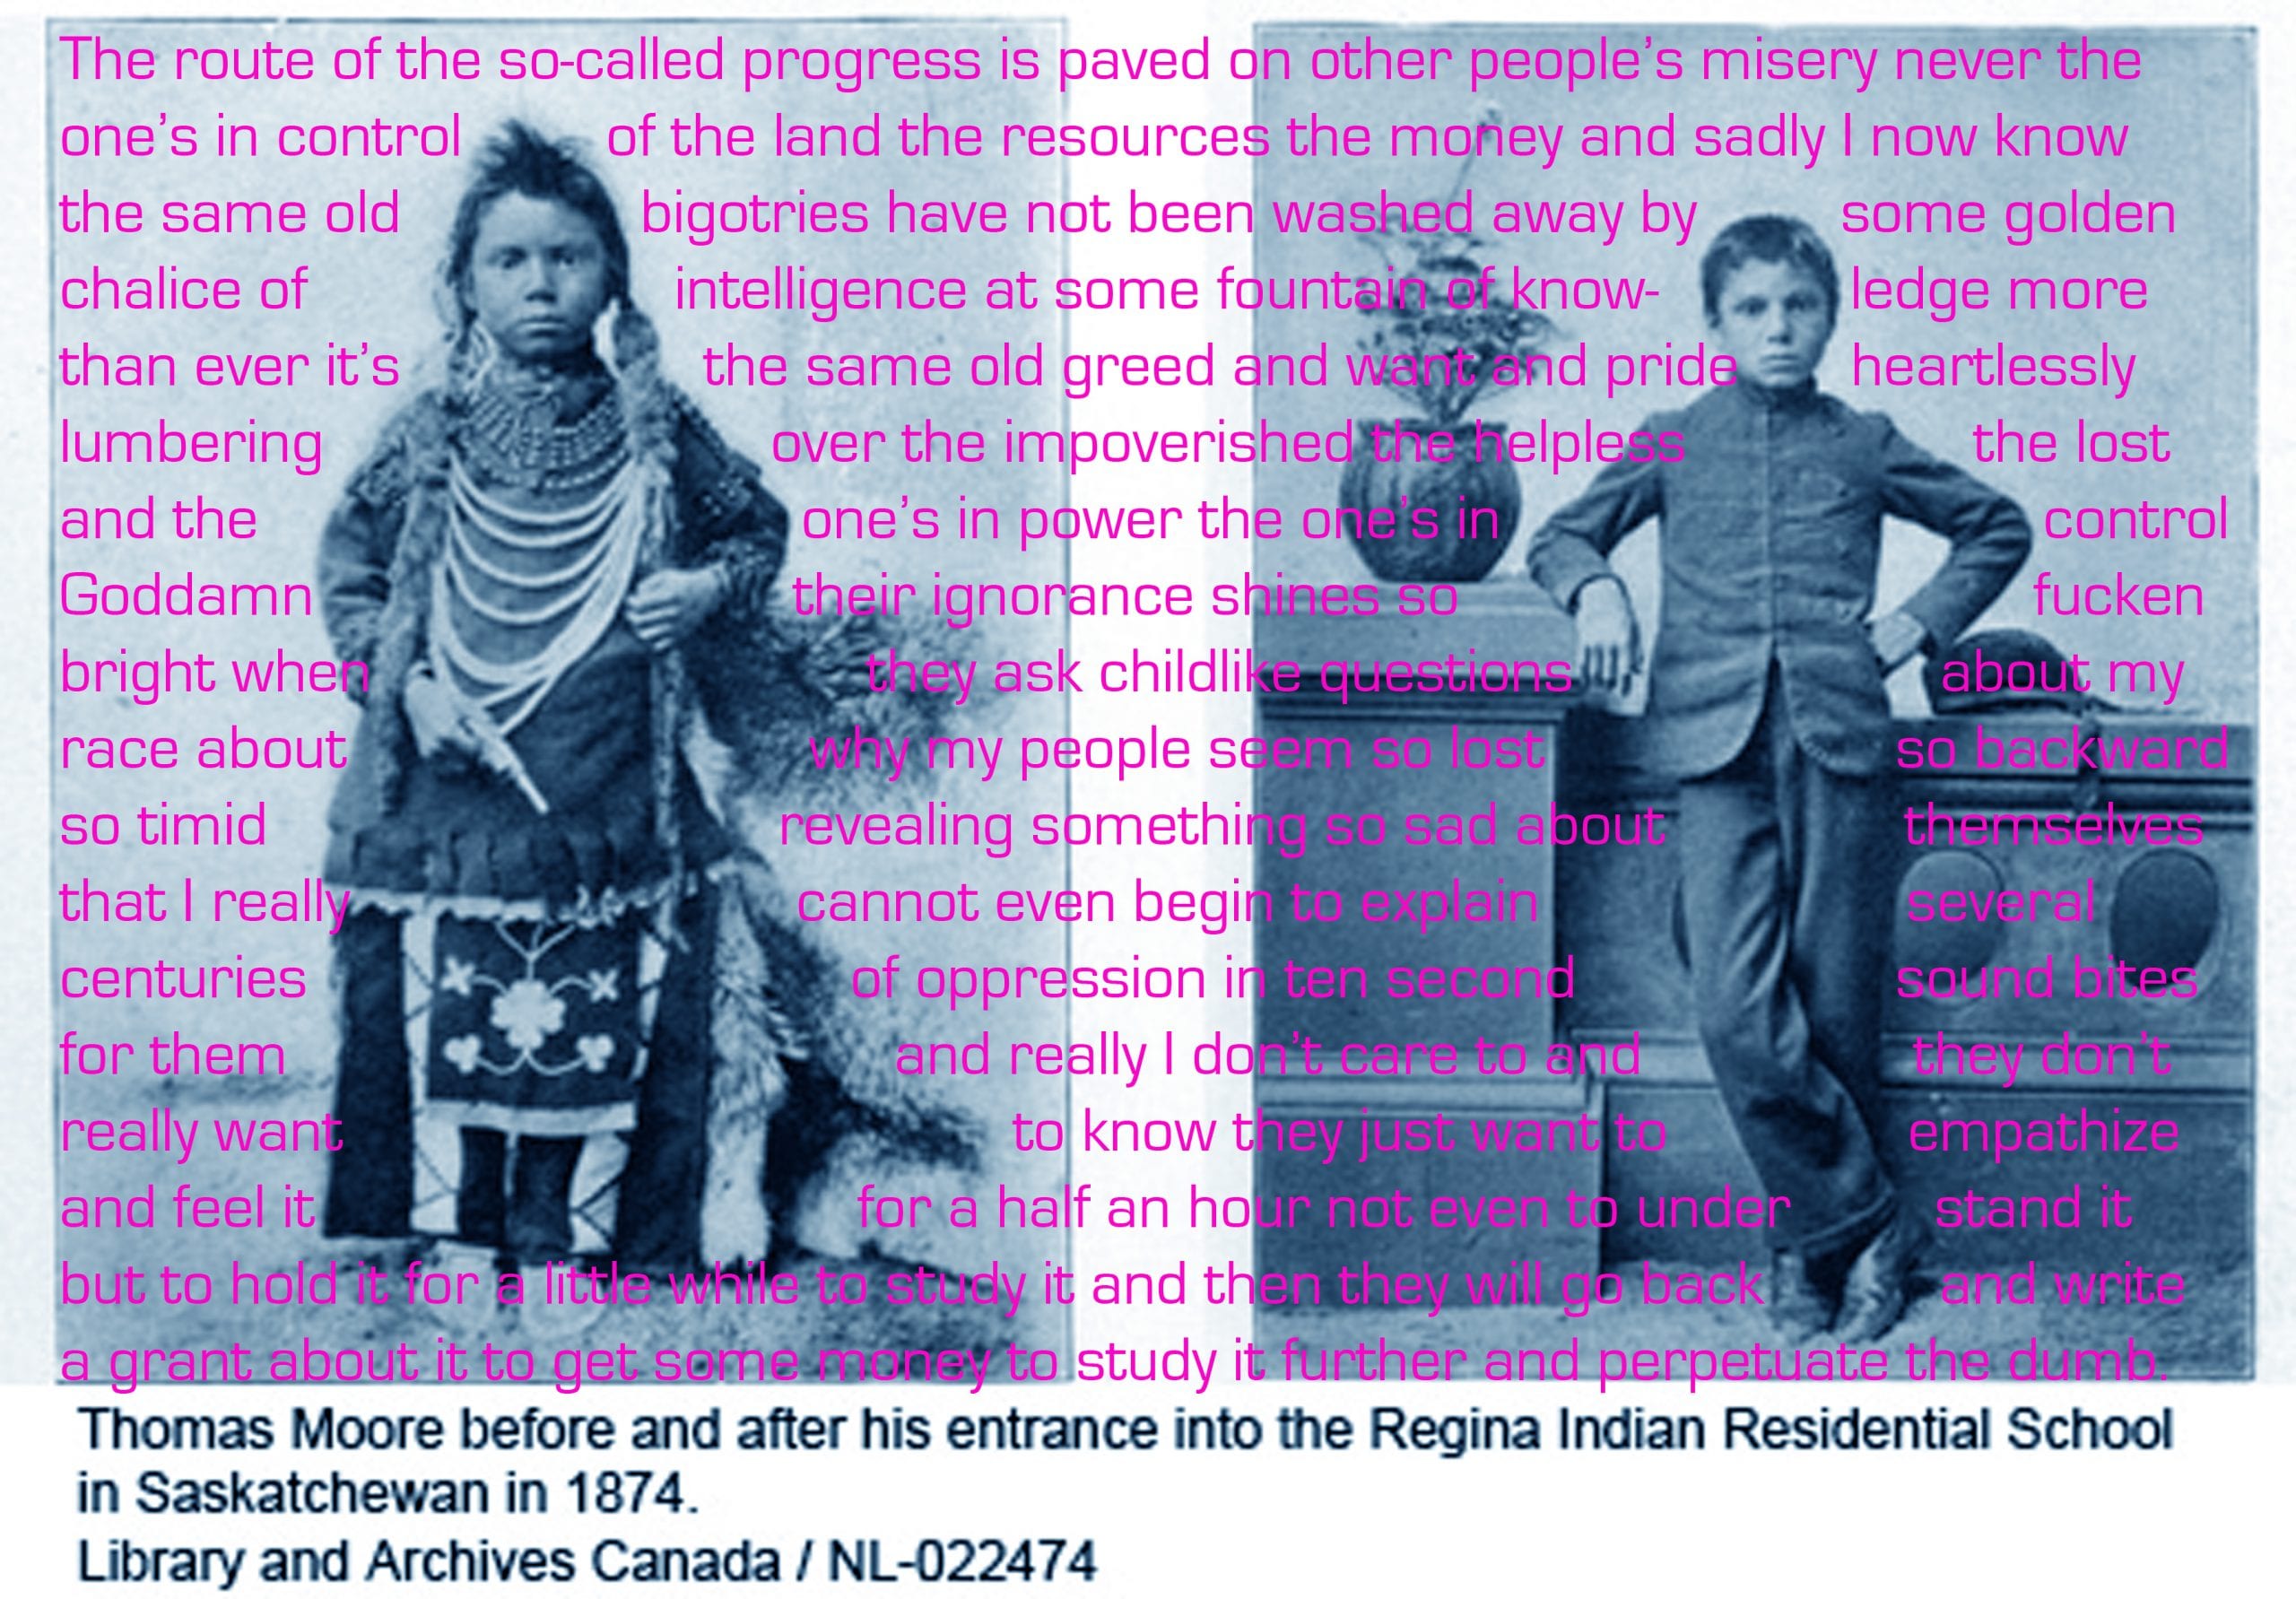 Digital collage including a pair of staged, black-and-white, 19th-century photographs of a young Indigenous boy before and after being assimilated at a Canadian residential school. The image is overlaid with contemporary anticolonial writing.